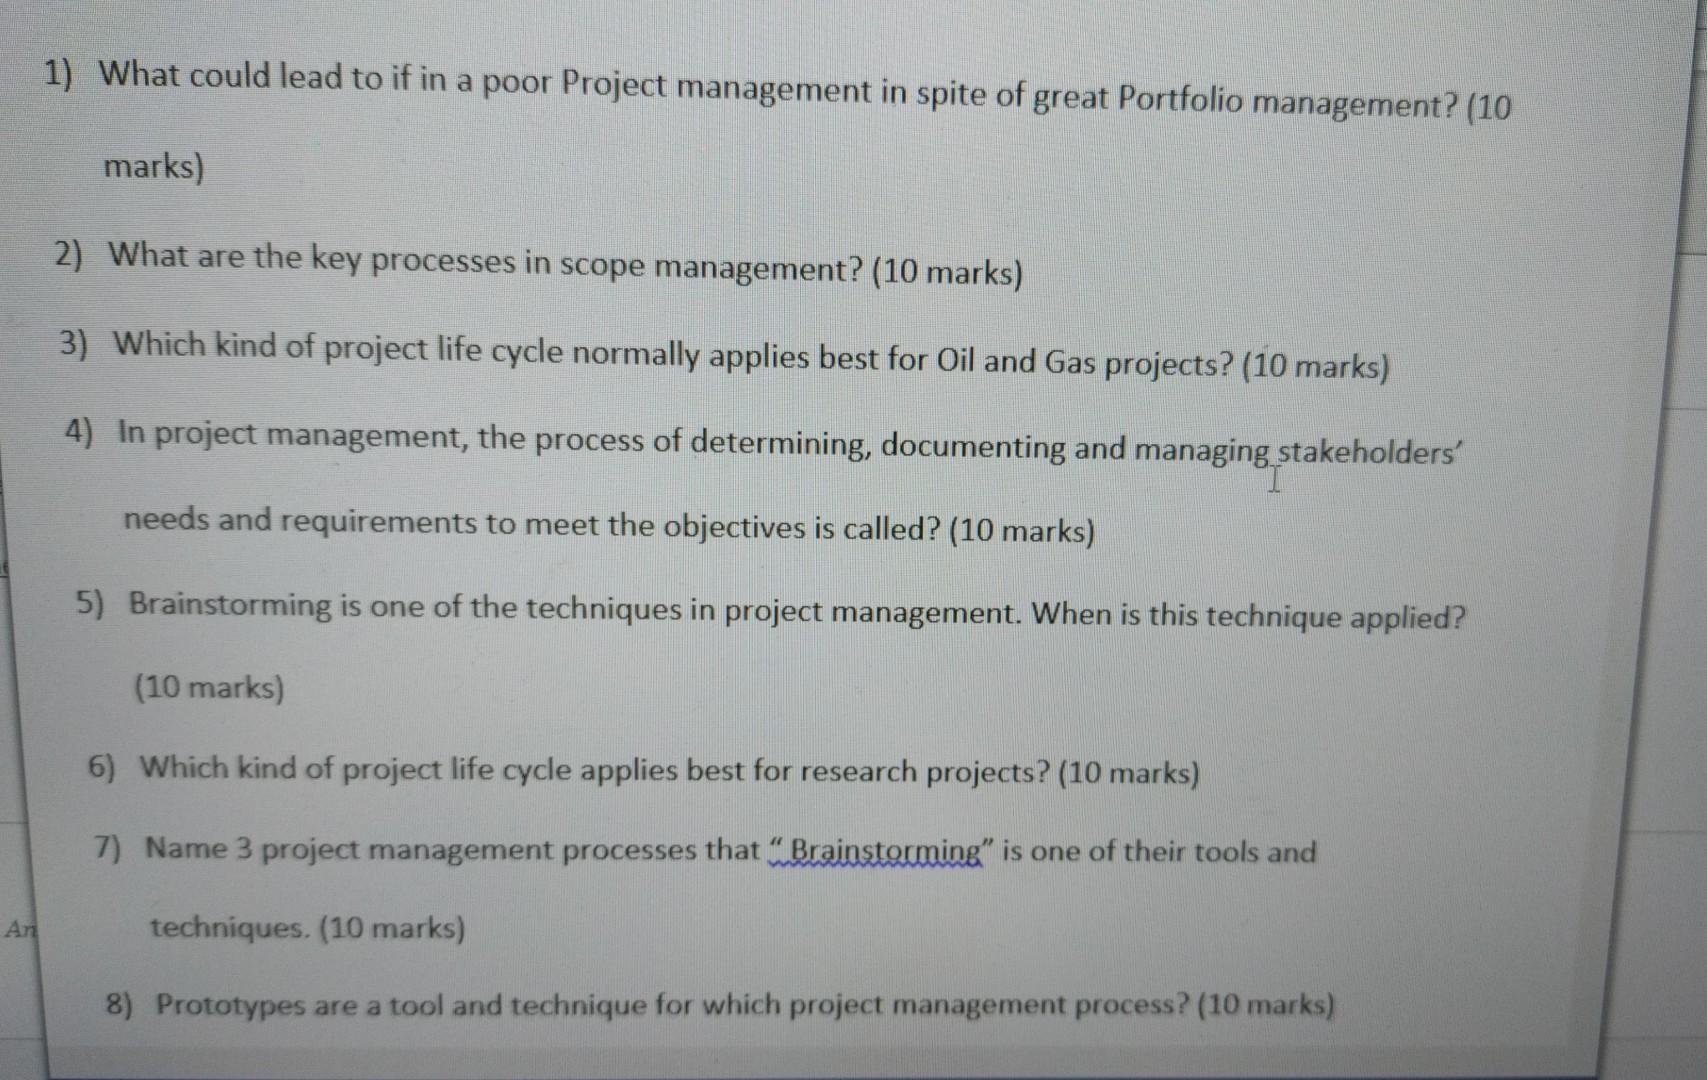 An 1) What could lead to if in a poor Project management in spite of great Portfolio management? (10 marks)